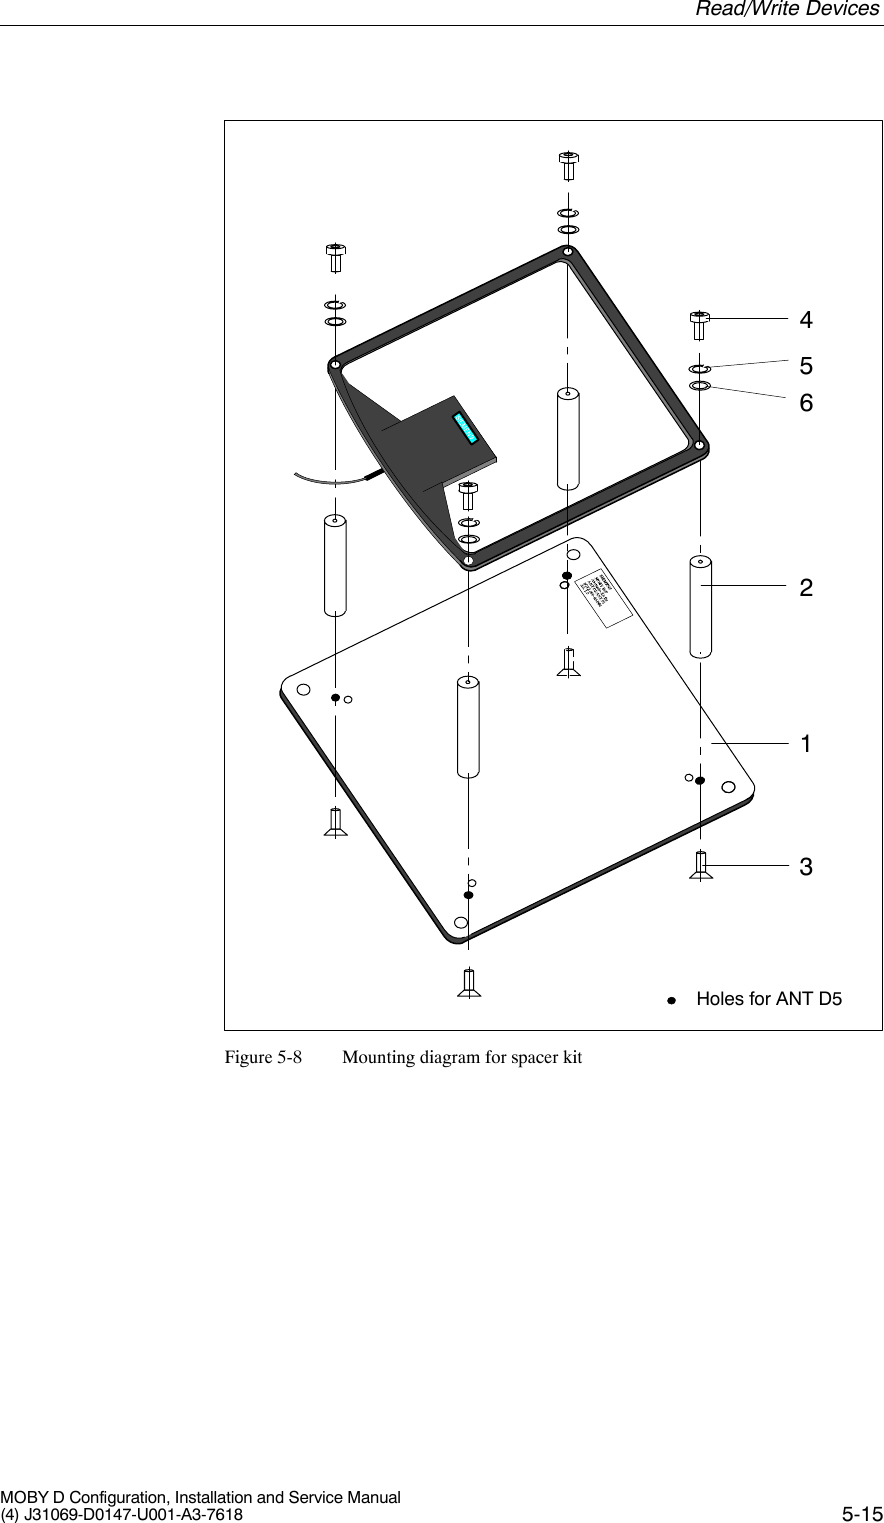 5-15MOBY D Configuration, Installation and Service Manual(4) J31069-D0147-U001-A3-7618456213Holes for ANT D5Figure 5-8 Mounting diagram for spacer kitRead/Write Devices